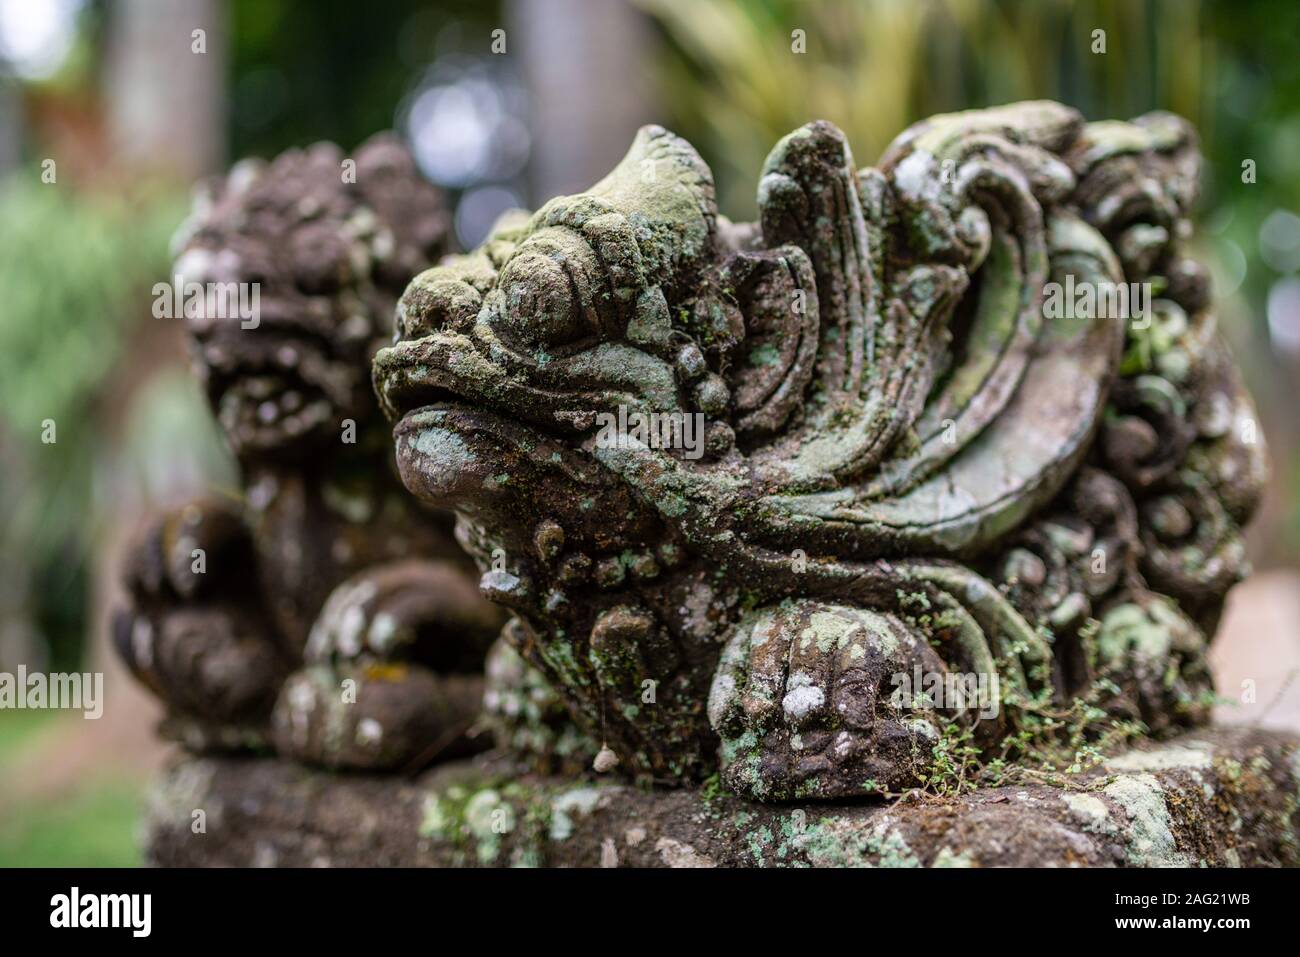 Statue of a monster with turtle head, taken on an overcast afternoon, Ubud, Bali, Indonesia Stock Photo